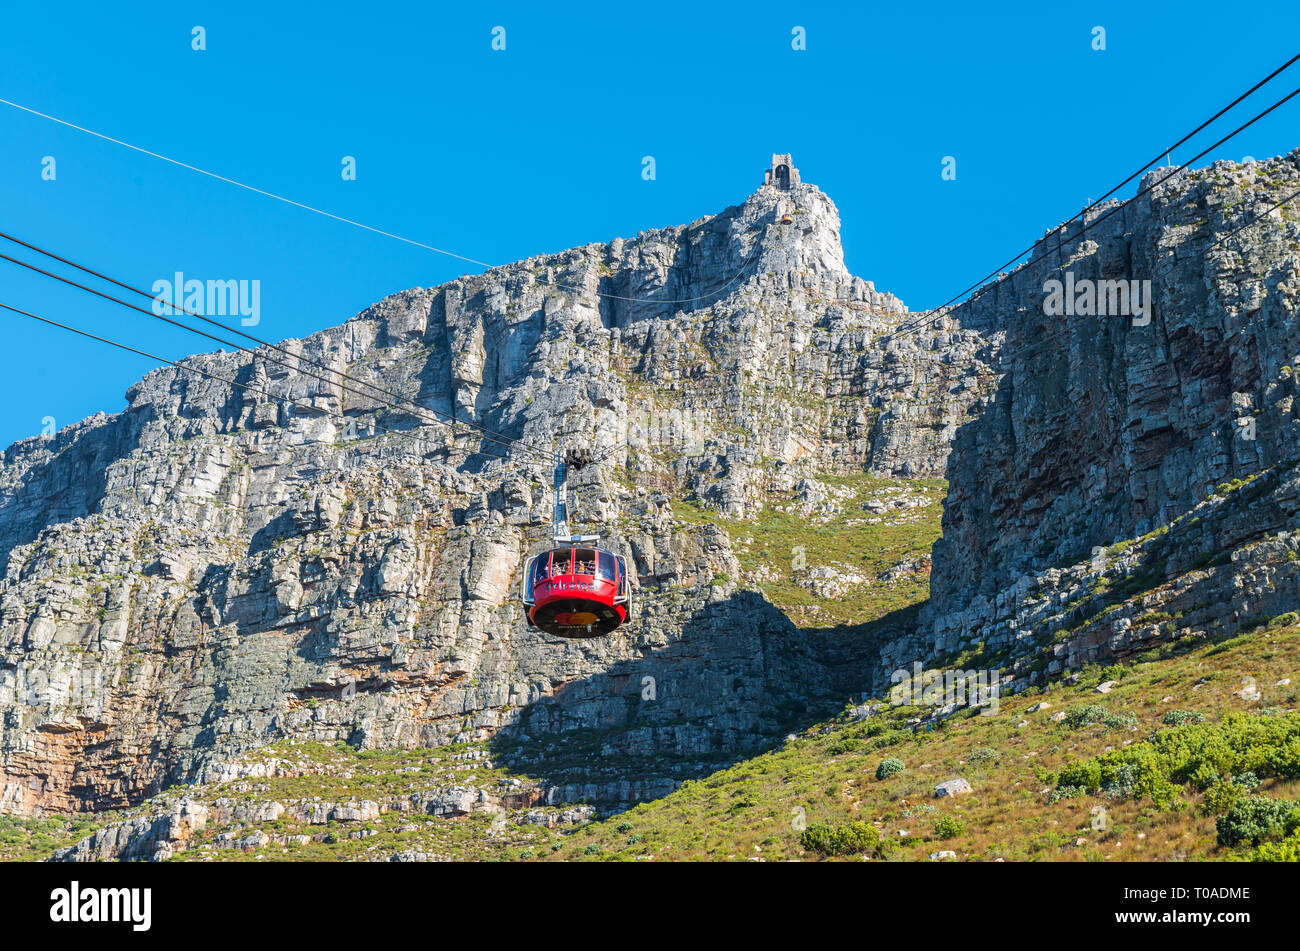 The famous cable car leading to Table mountain national park bringing tourists up the mountain for hikes and viewpoints, Cape Town, South Africa. Stock Photo